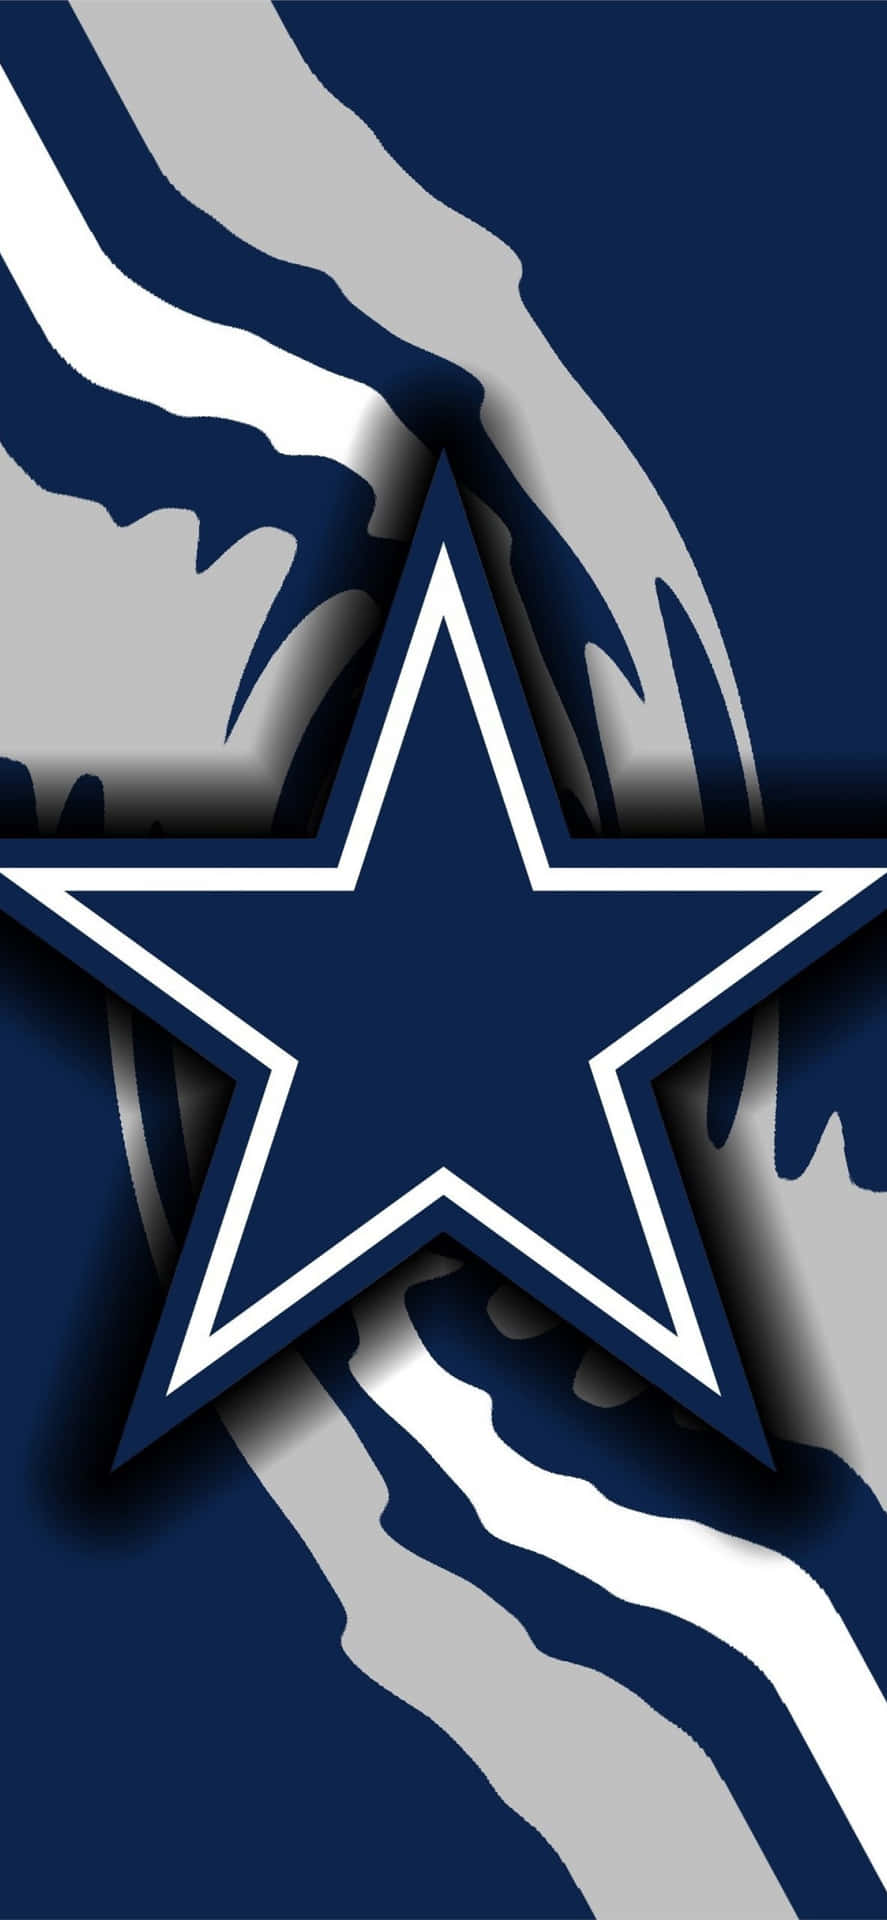 Swirling Stripes Of Dallas Cowboys Iphone Wallpaper